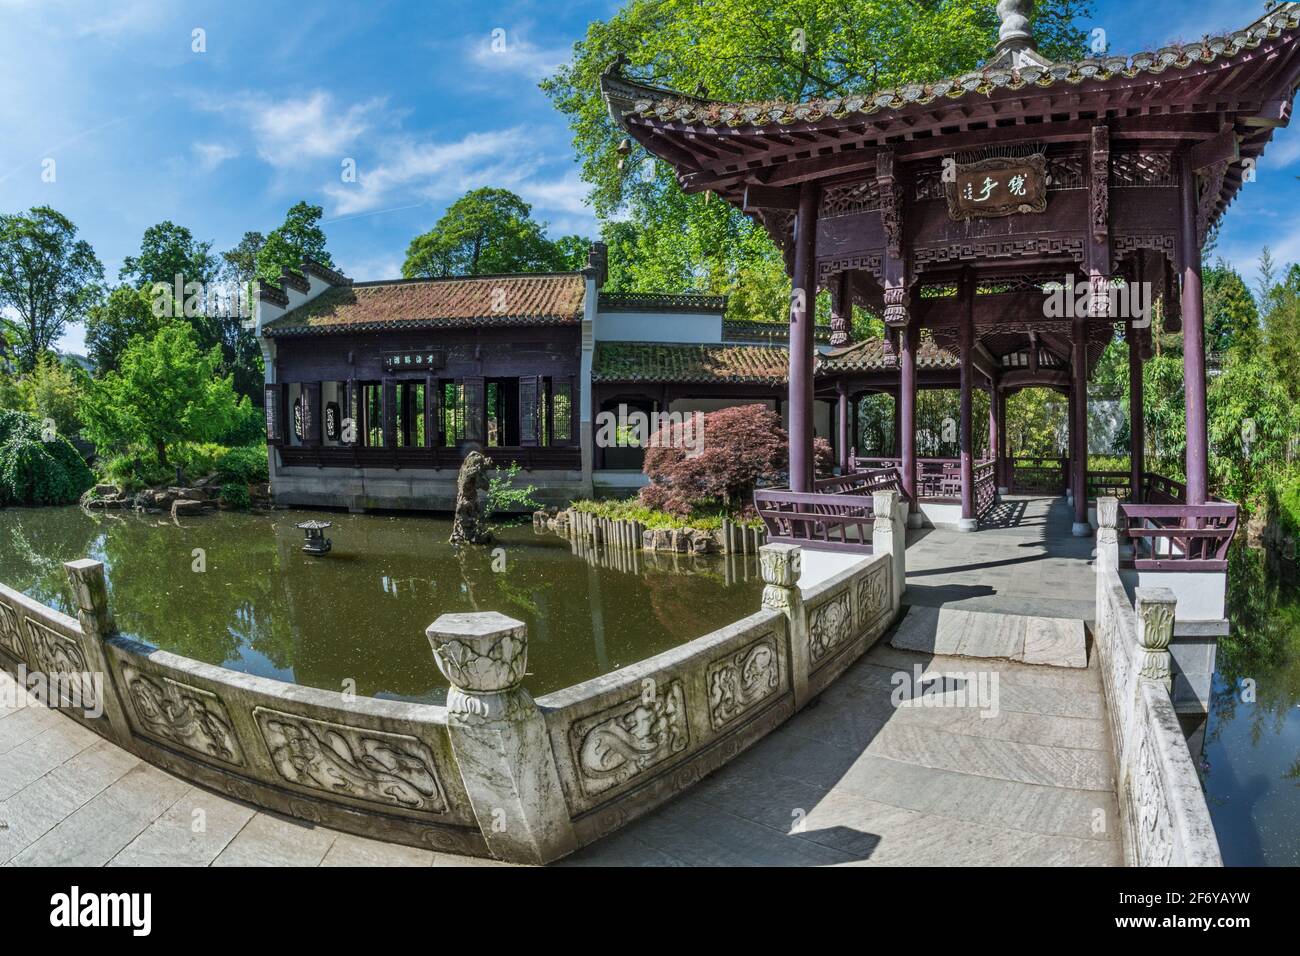 FRANKFURT AM MAIN, GERMANY - MAY 20, 2016: Chinese park in Frankfurt am Main. A quiet, beautiful place to relax. Popular with locals and tourists. It Stock Photo